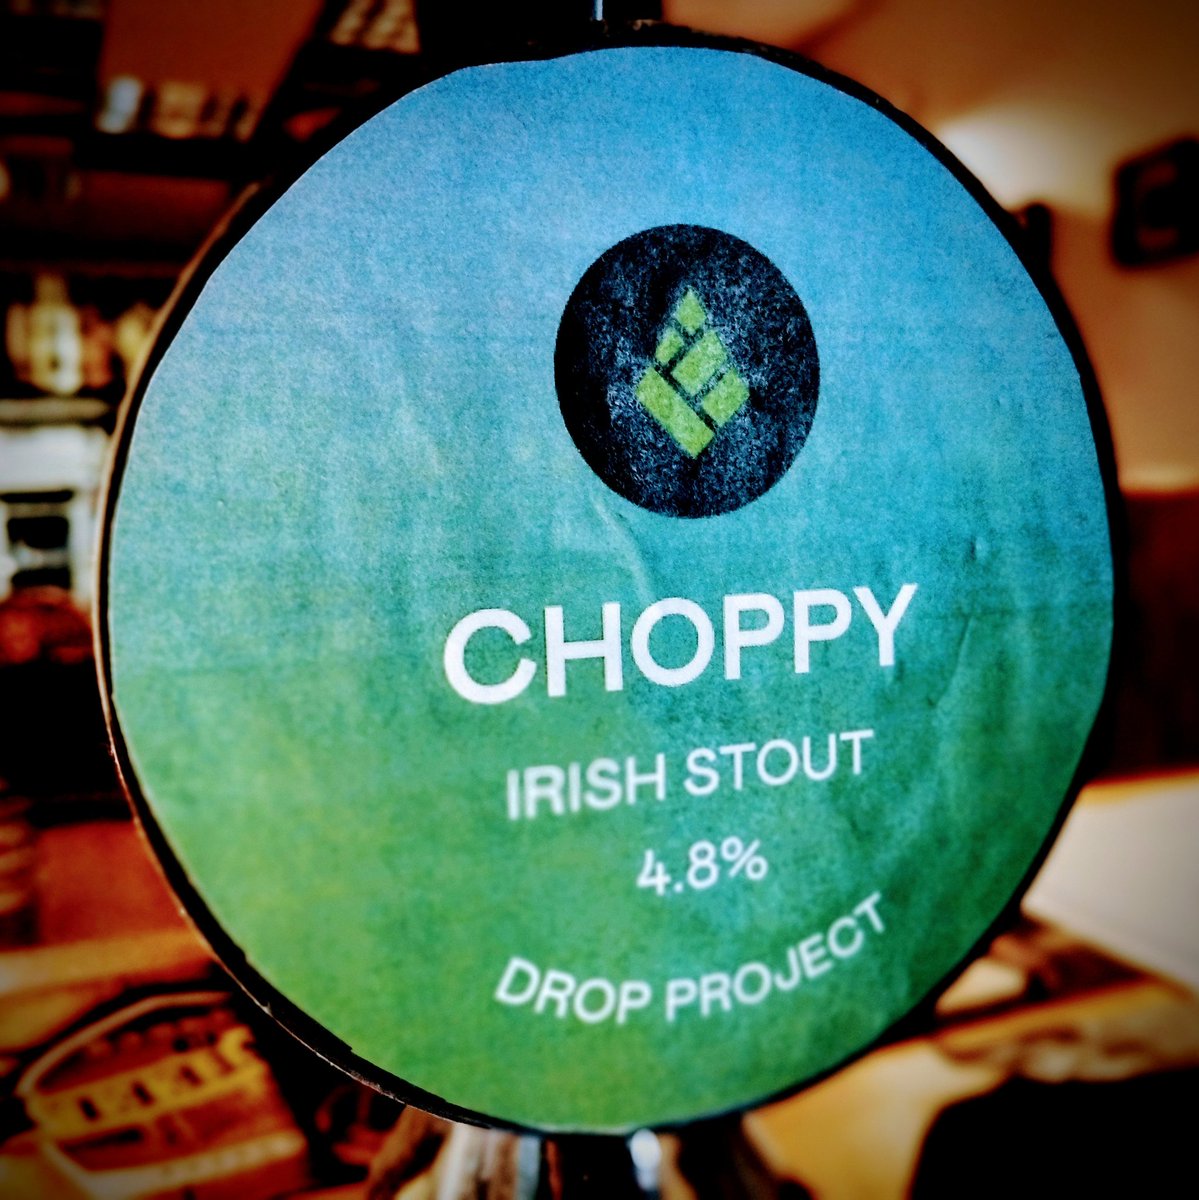 The stout demand is still through the roof! We do have other beers you know?! 😁 A straight-up, no bollocks dry stout from Drop Project Brewing Co. Roasty, slightly smoky and intense with a tinge of dark chocolate and coffee beans. Open at 4pm... #colwynbay #alehouse #pub